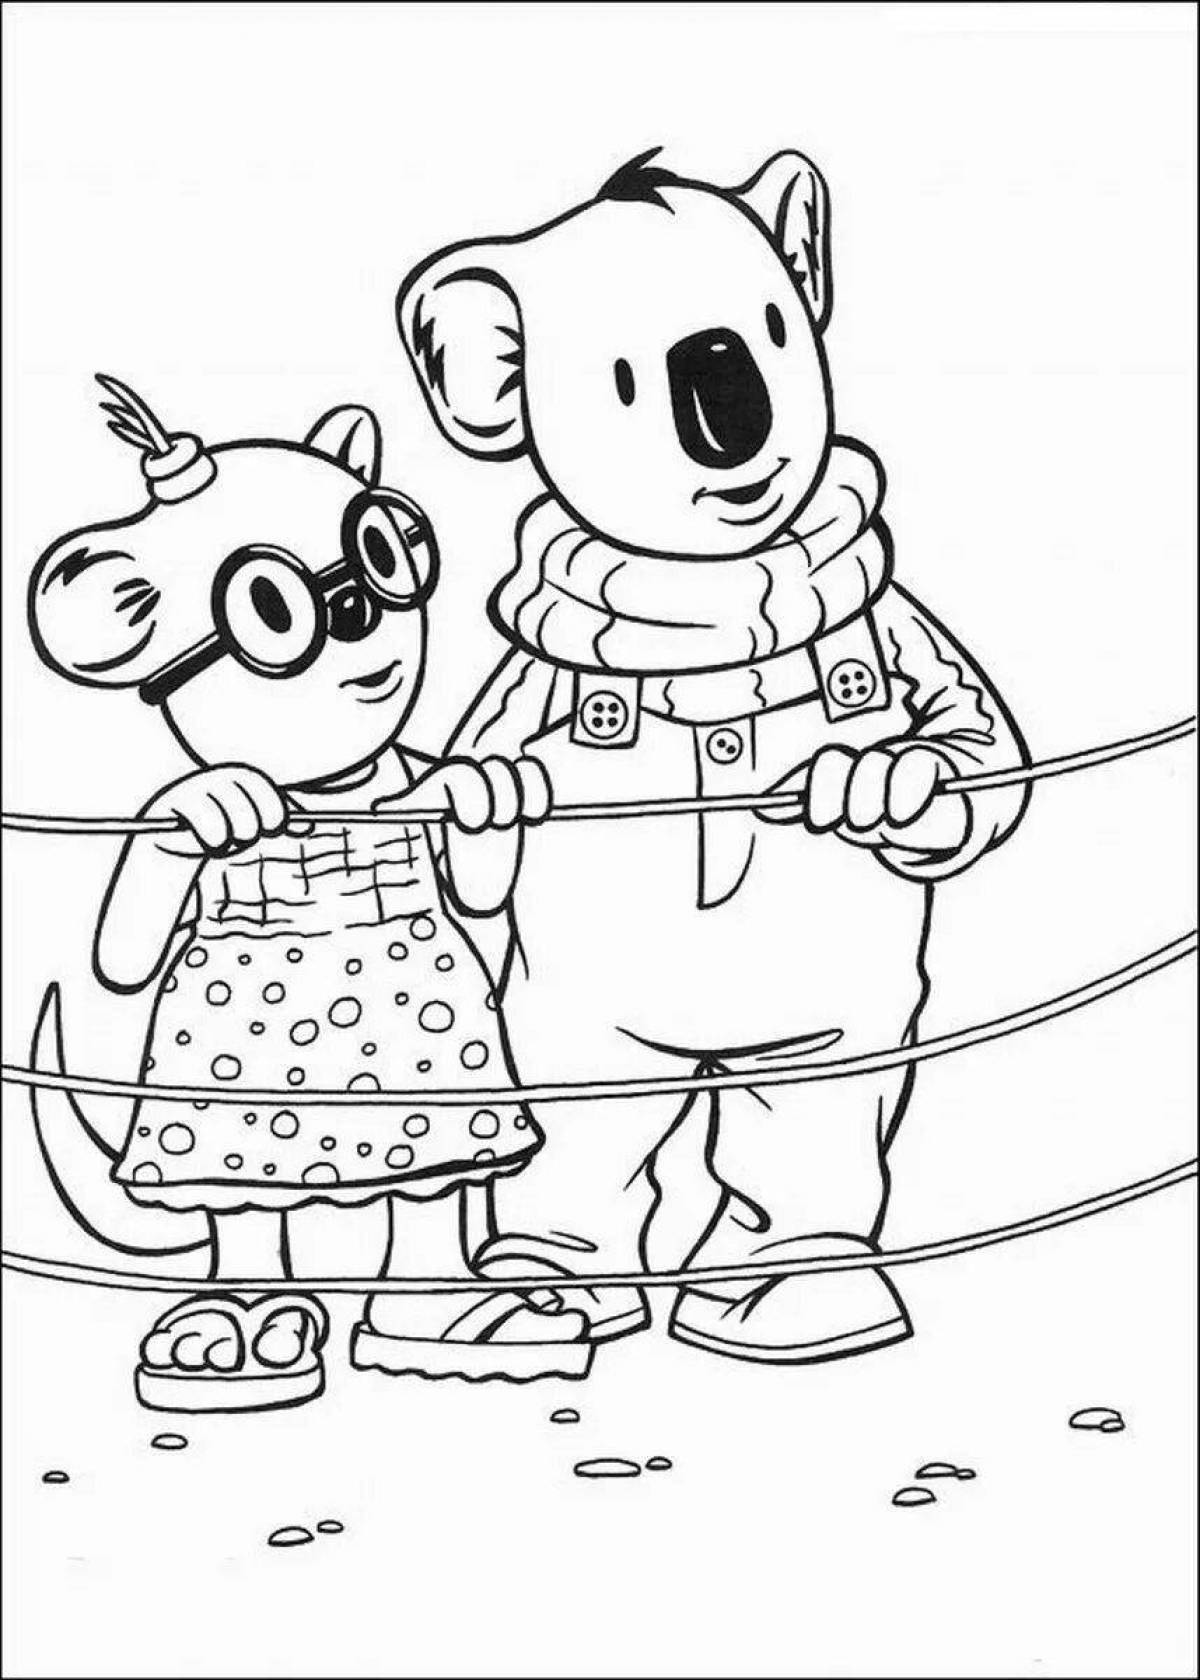 Colorful koala brothers coloring book